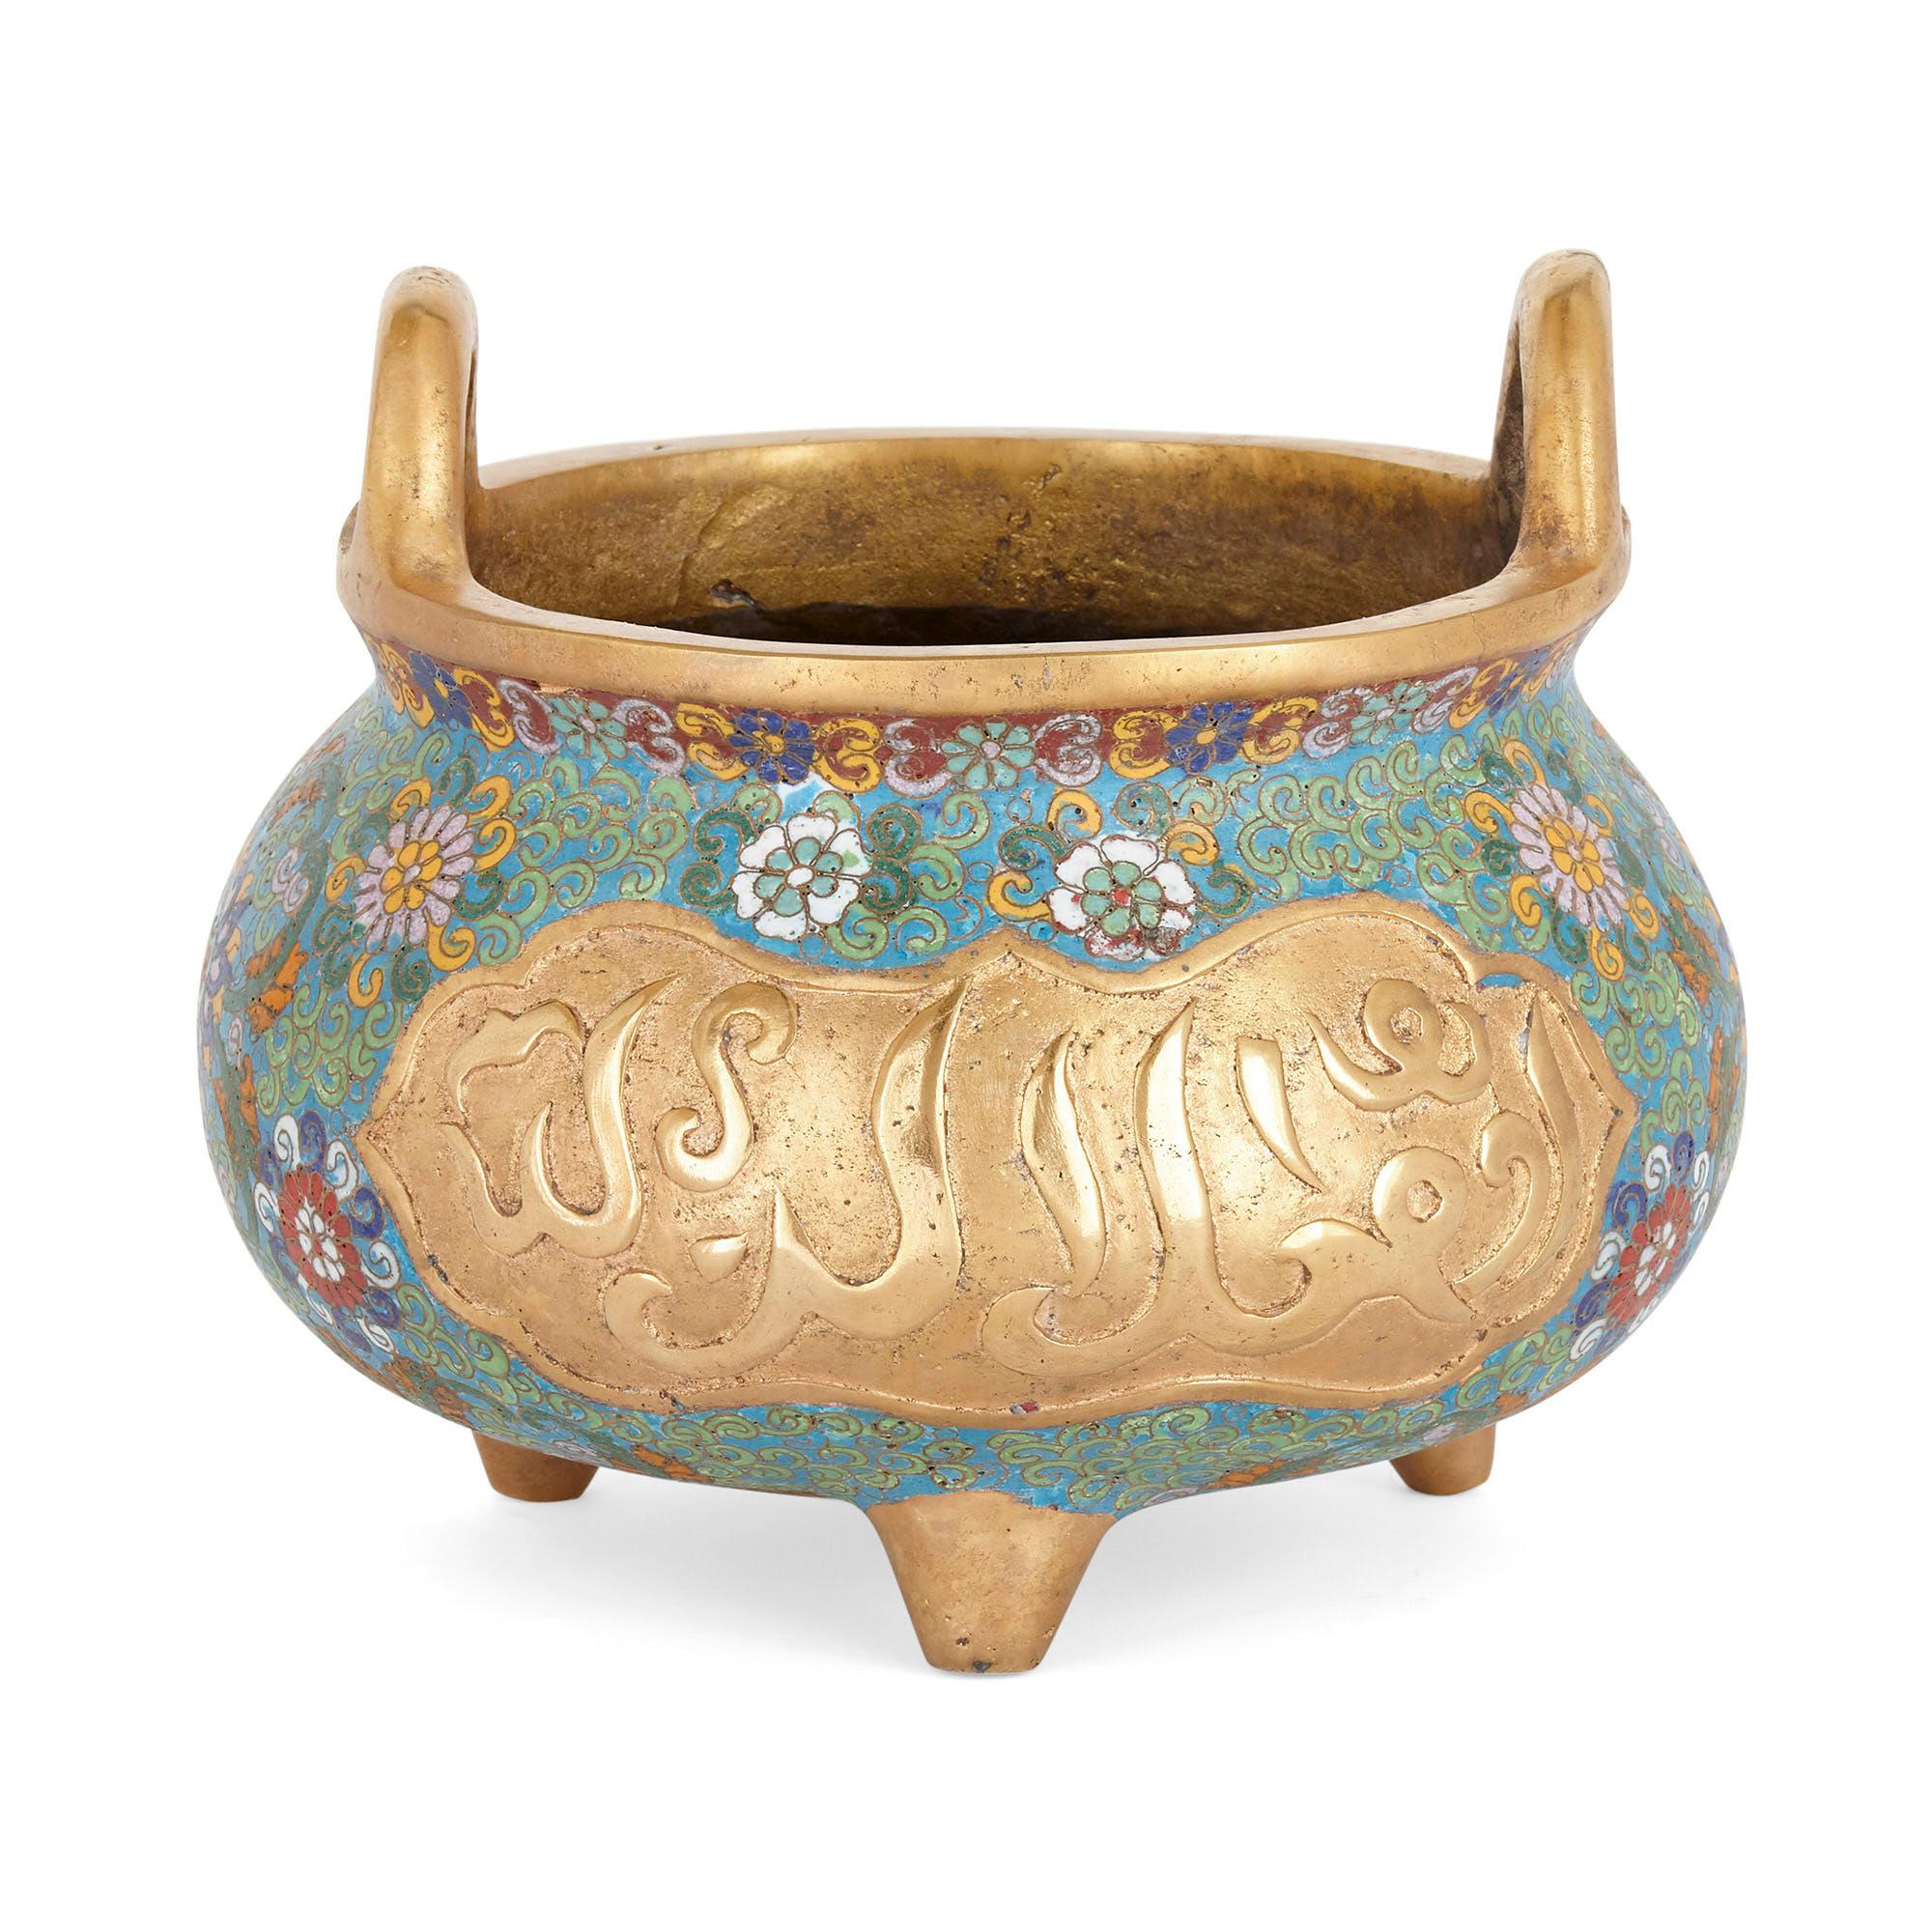 Chinese bowl adorned with cloisonné enamel and Arabic inscriptions
Chinese, early 20th century
Measures: Height 20cm, diameter 23cm

This beautiful bowl is a superb example of Chinese export ware designed for an Islamic market. The bowl is